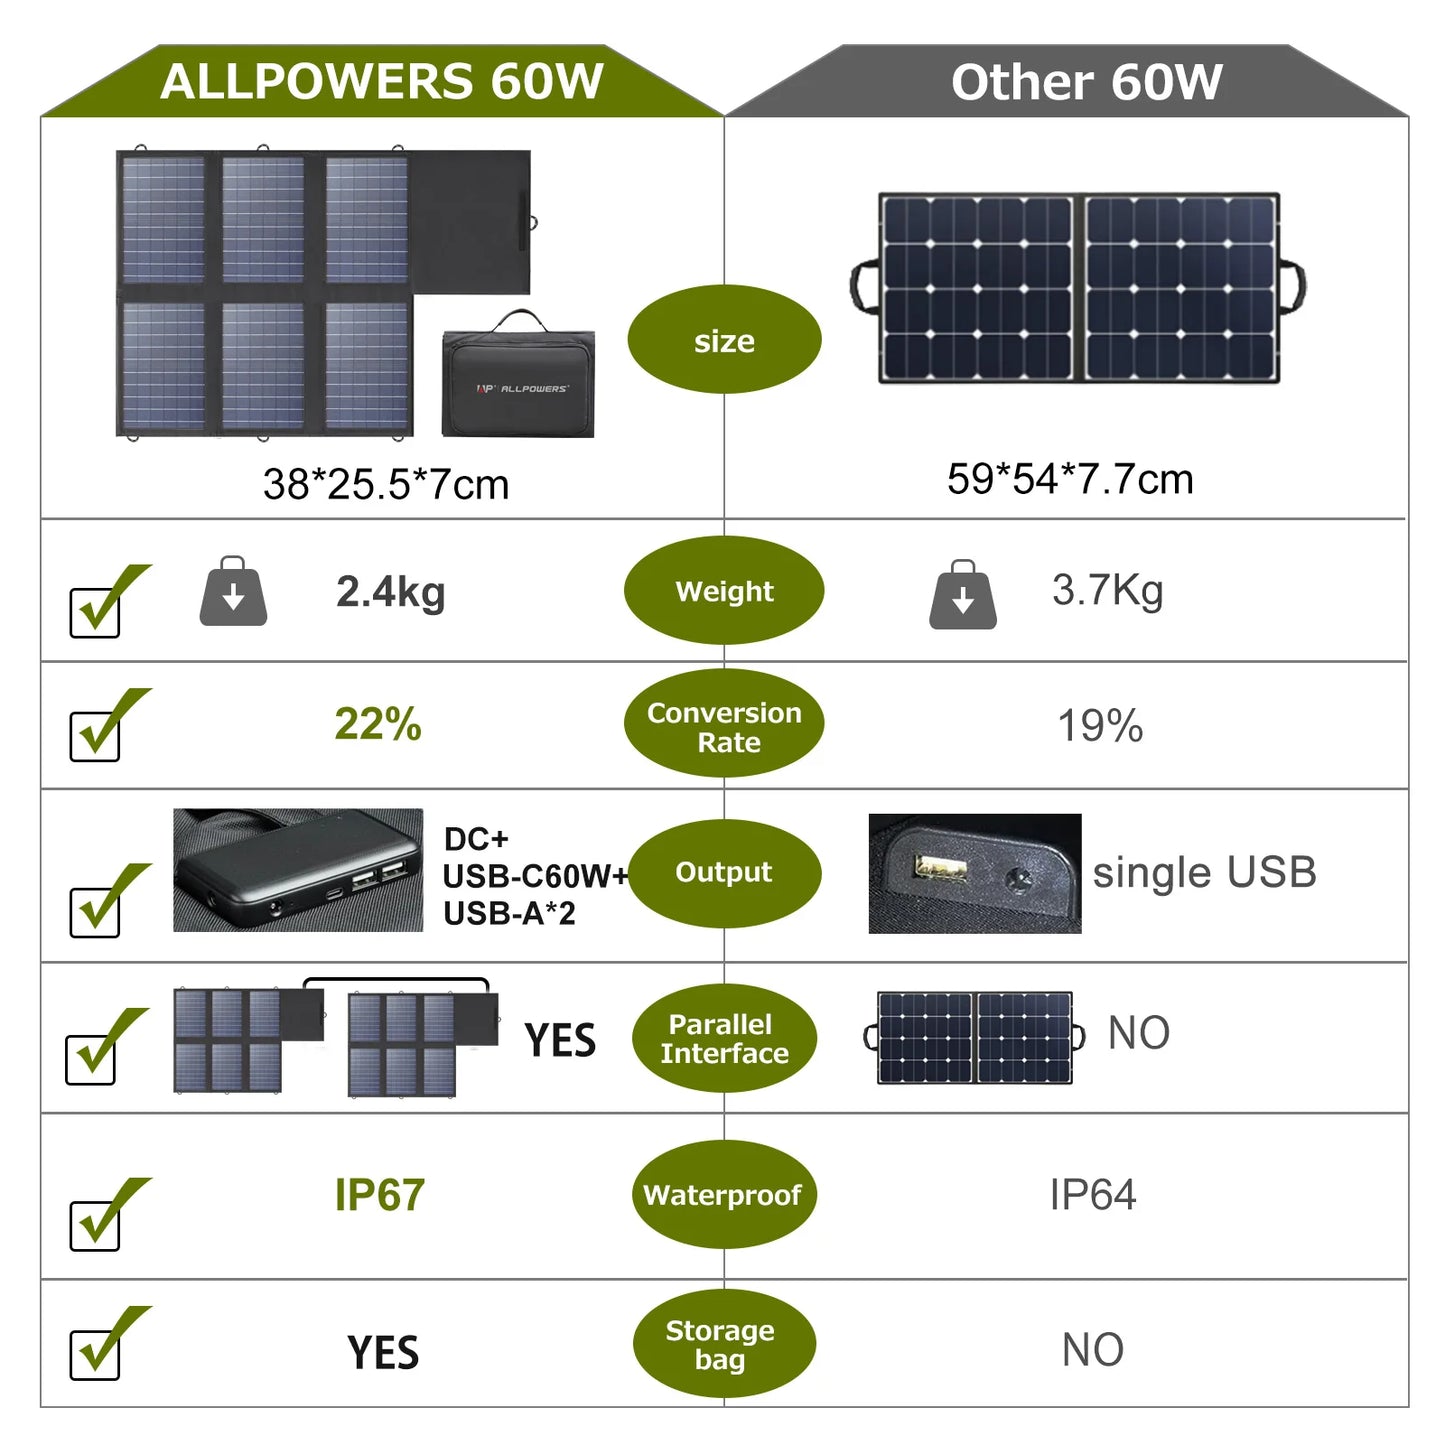 ALLPOWERS Solar Panel 60W Foldable Solar Charger with 18V DC + 5V USB + USB-C - Inverted Powers